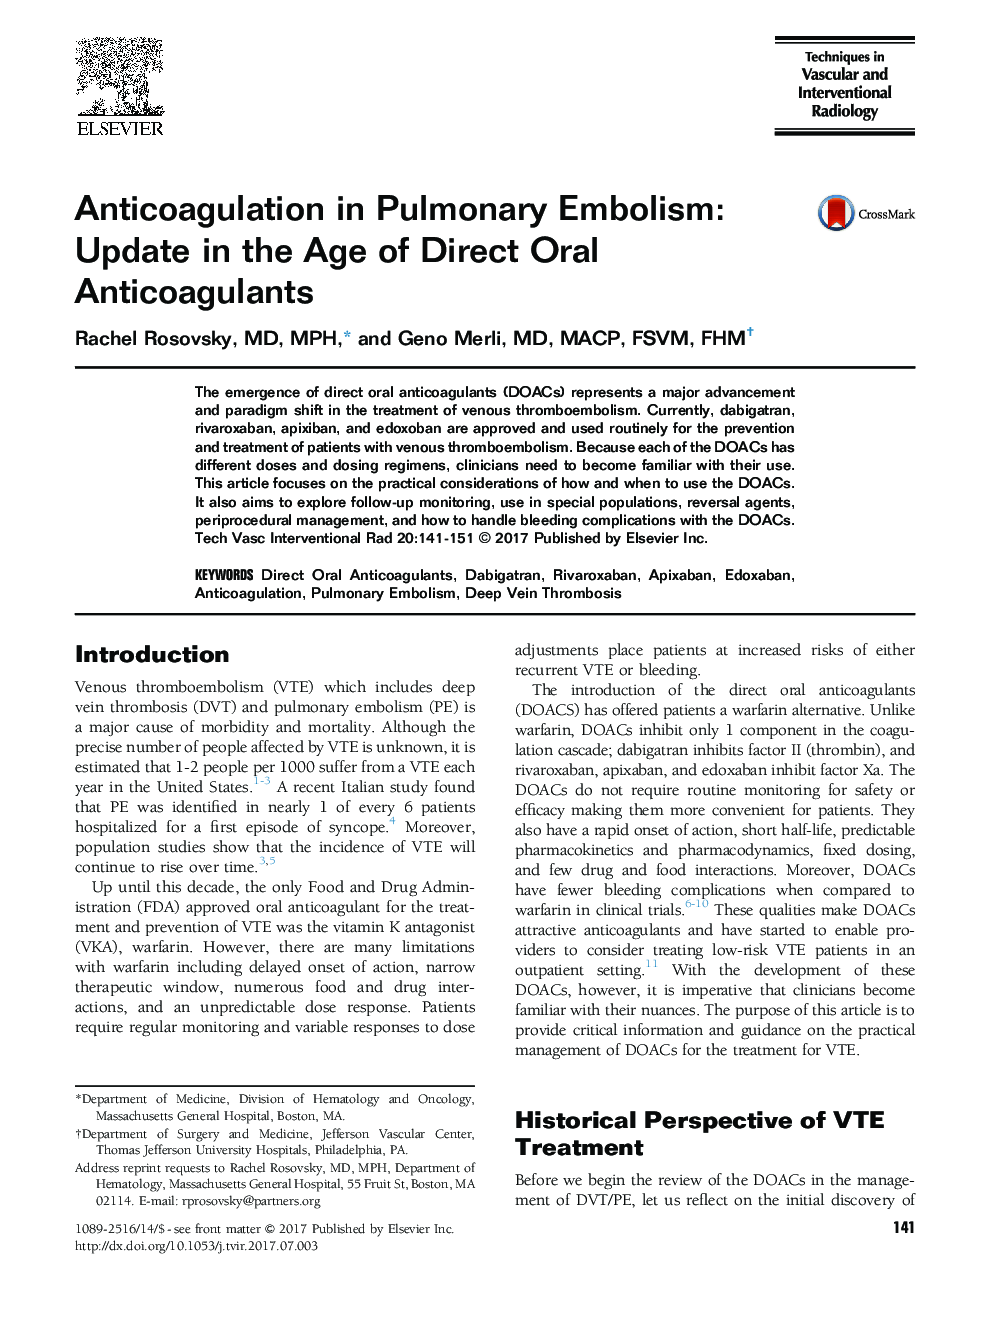 Anticoagulation in Pulmonary Embolism: Update in the Age of Direct Oral Anticoagulants